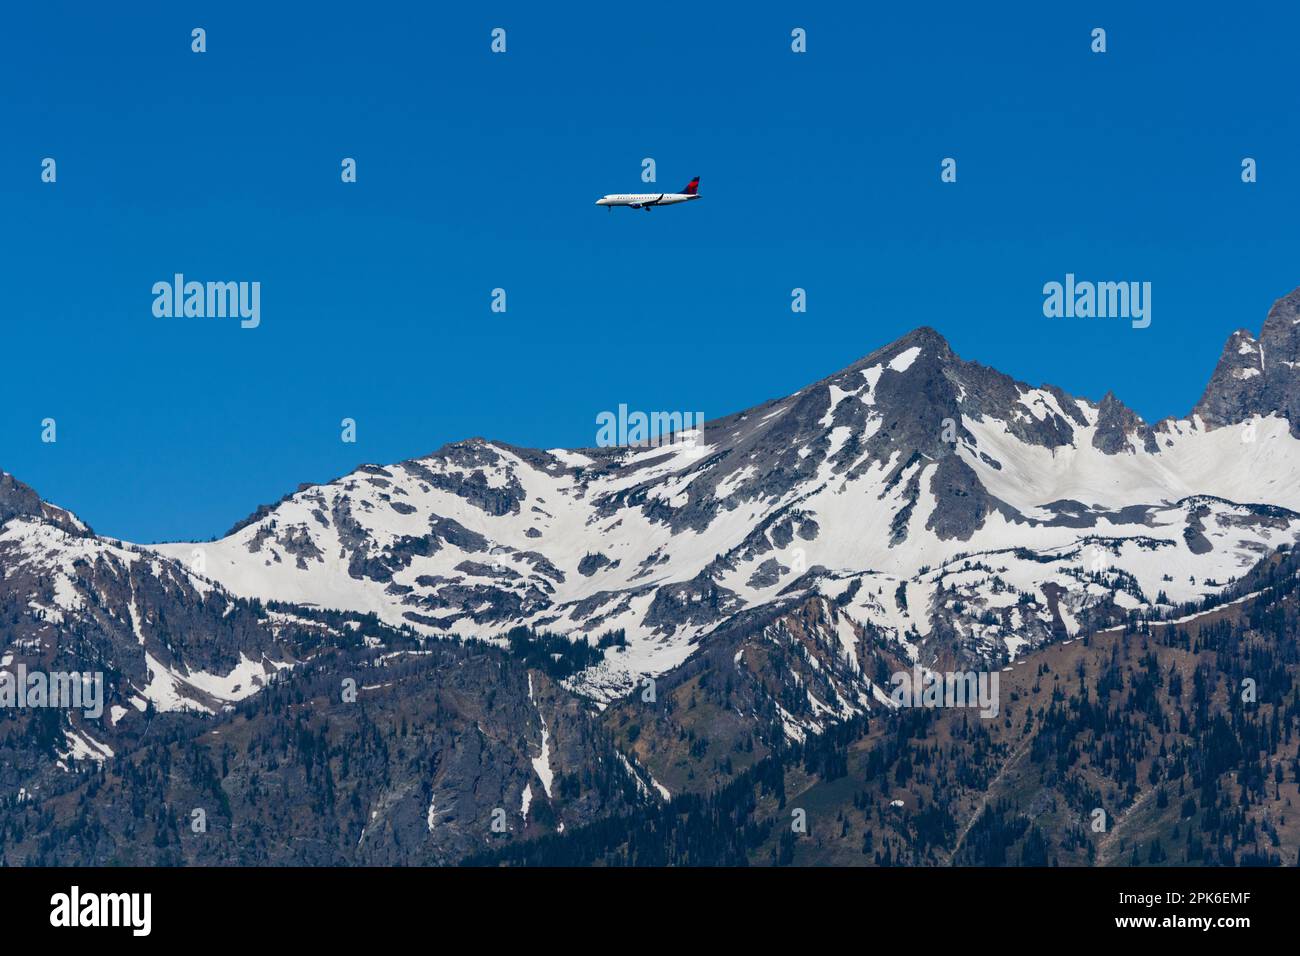 Mountains covered in snow, plane in sky, Wedge Mountain, British Columbia, Canada Stock Photo